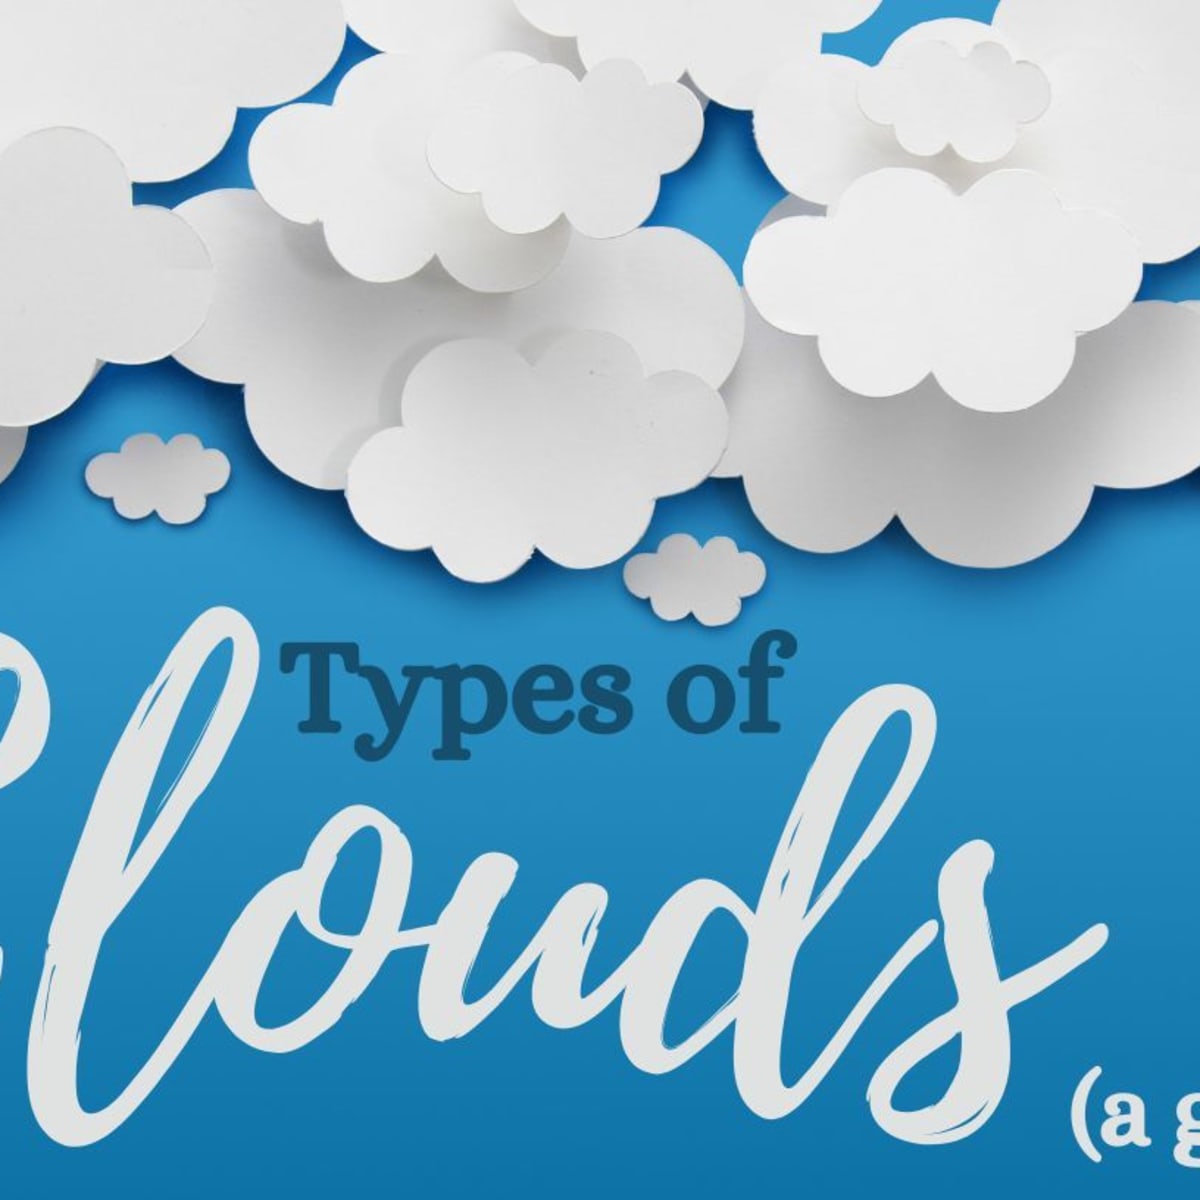 types of clouds for kids printables